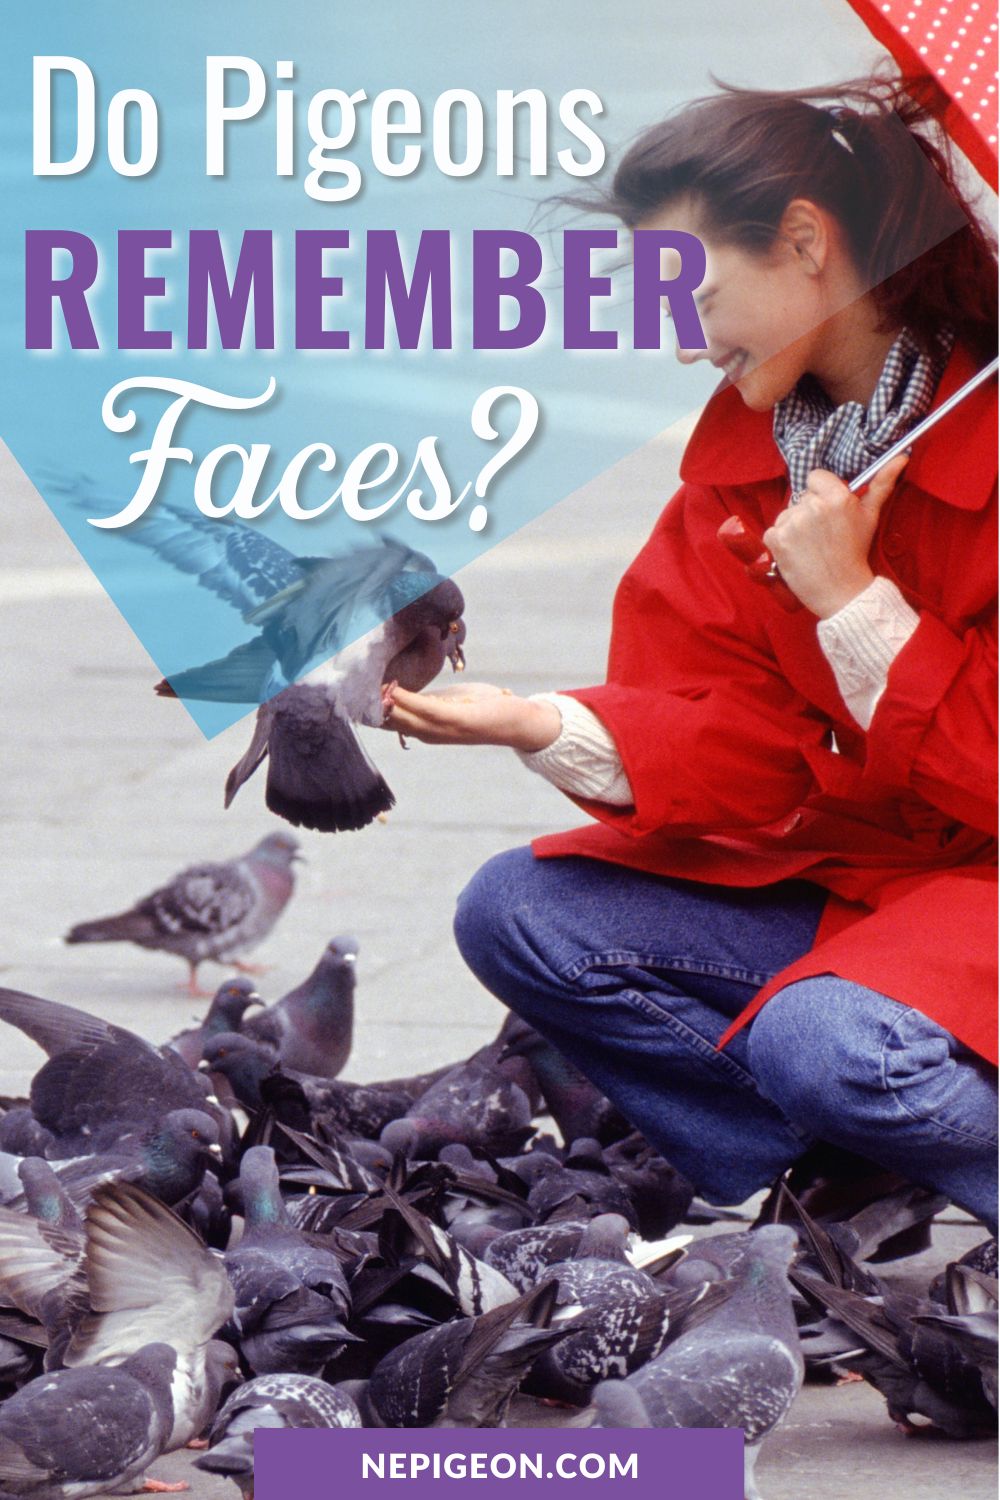 A woman in red squatting in front of the pigeons with text overlays that read Do Pigeons Remember Faces